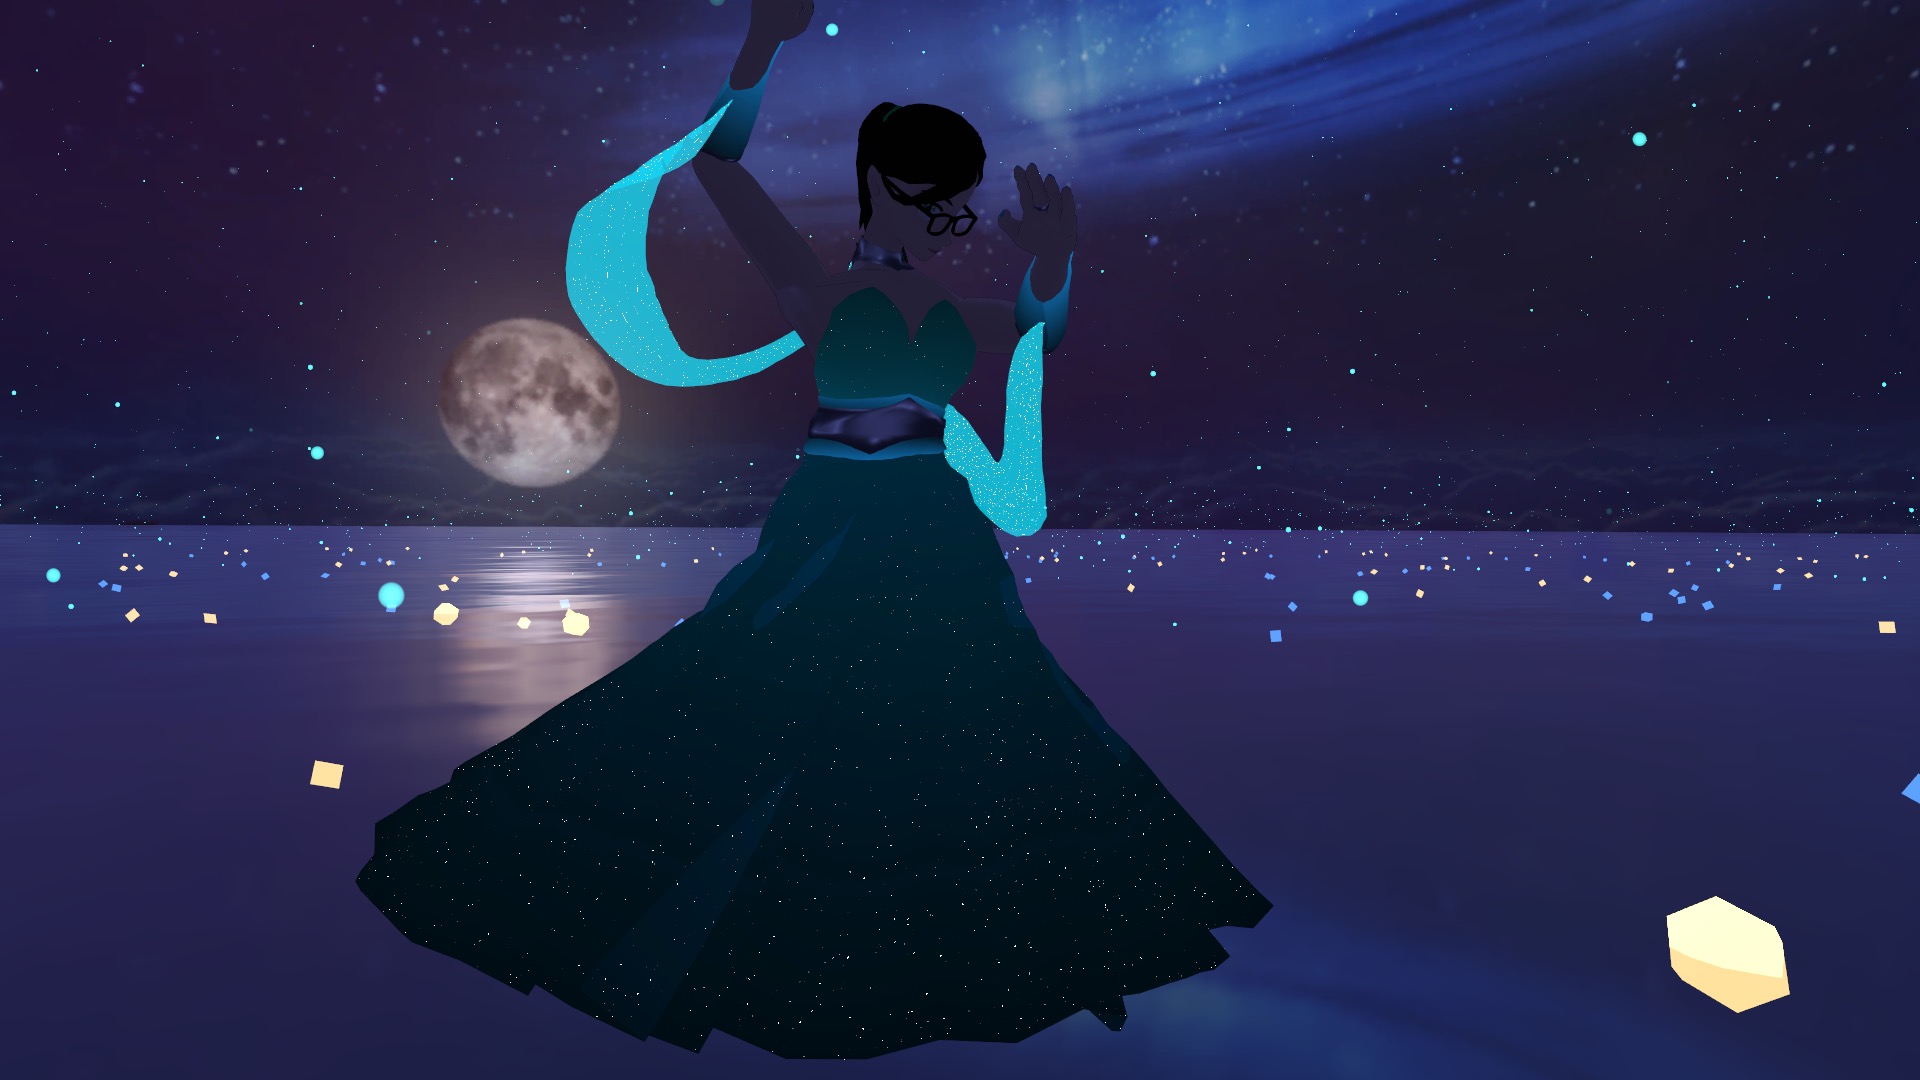 a digital avatar wearing a flowy green dress with cyan arm-tassels dances in front of of the moon in the background.